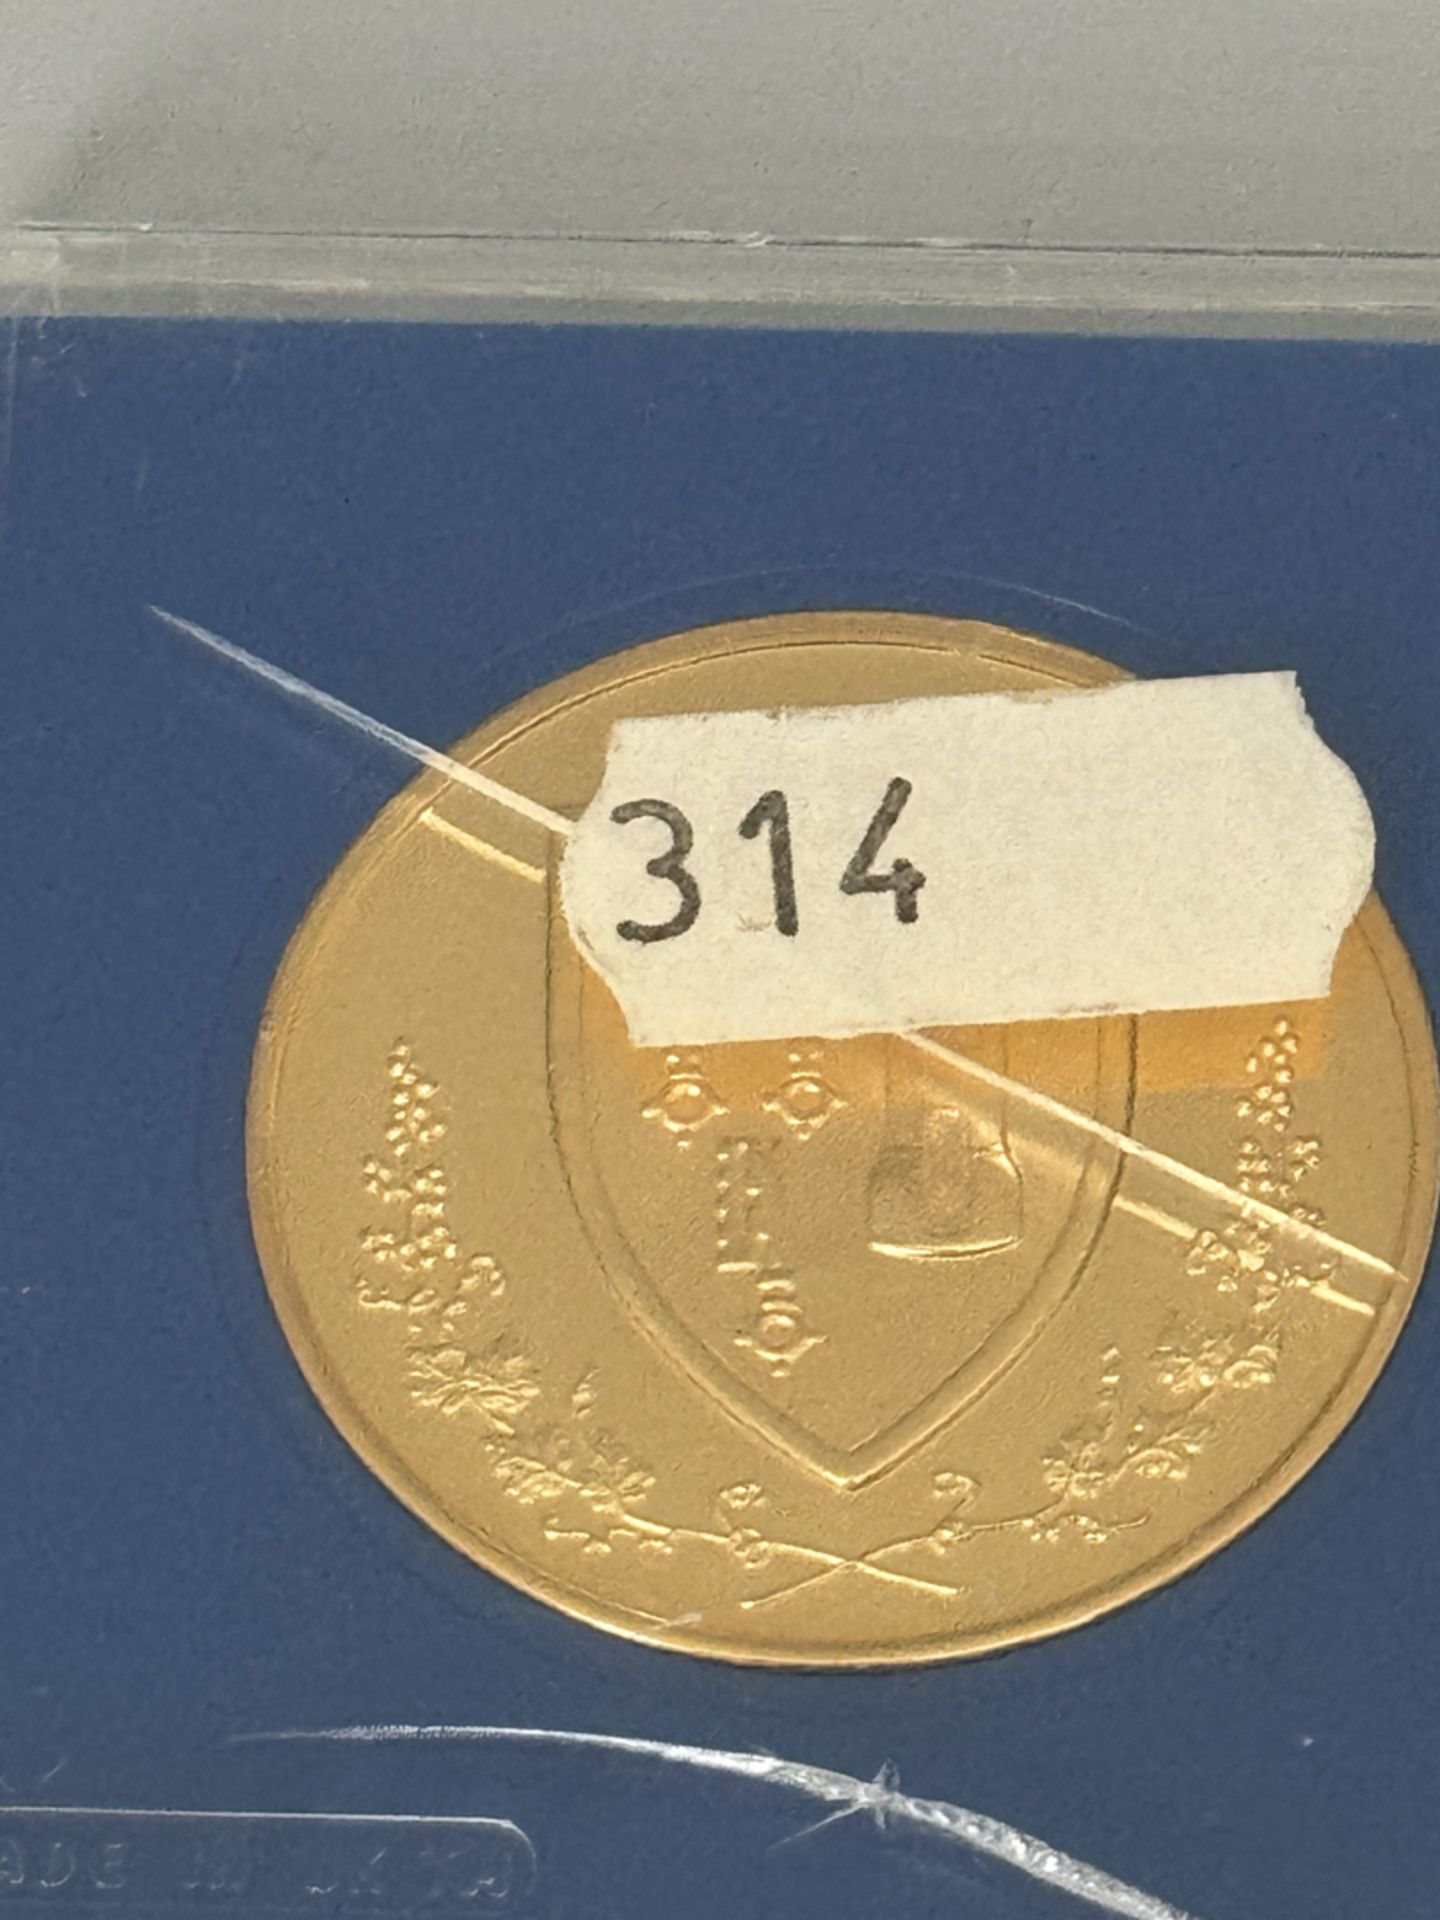 Beaune Hospices 22ct Gold Plated Coin / Medal - Image 4 of 4